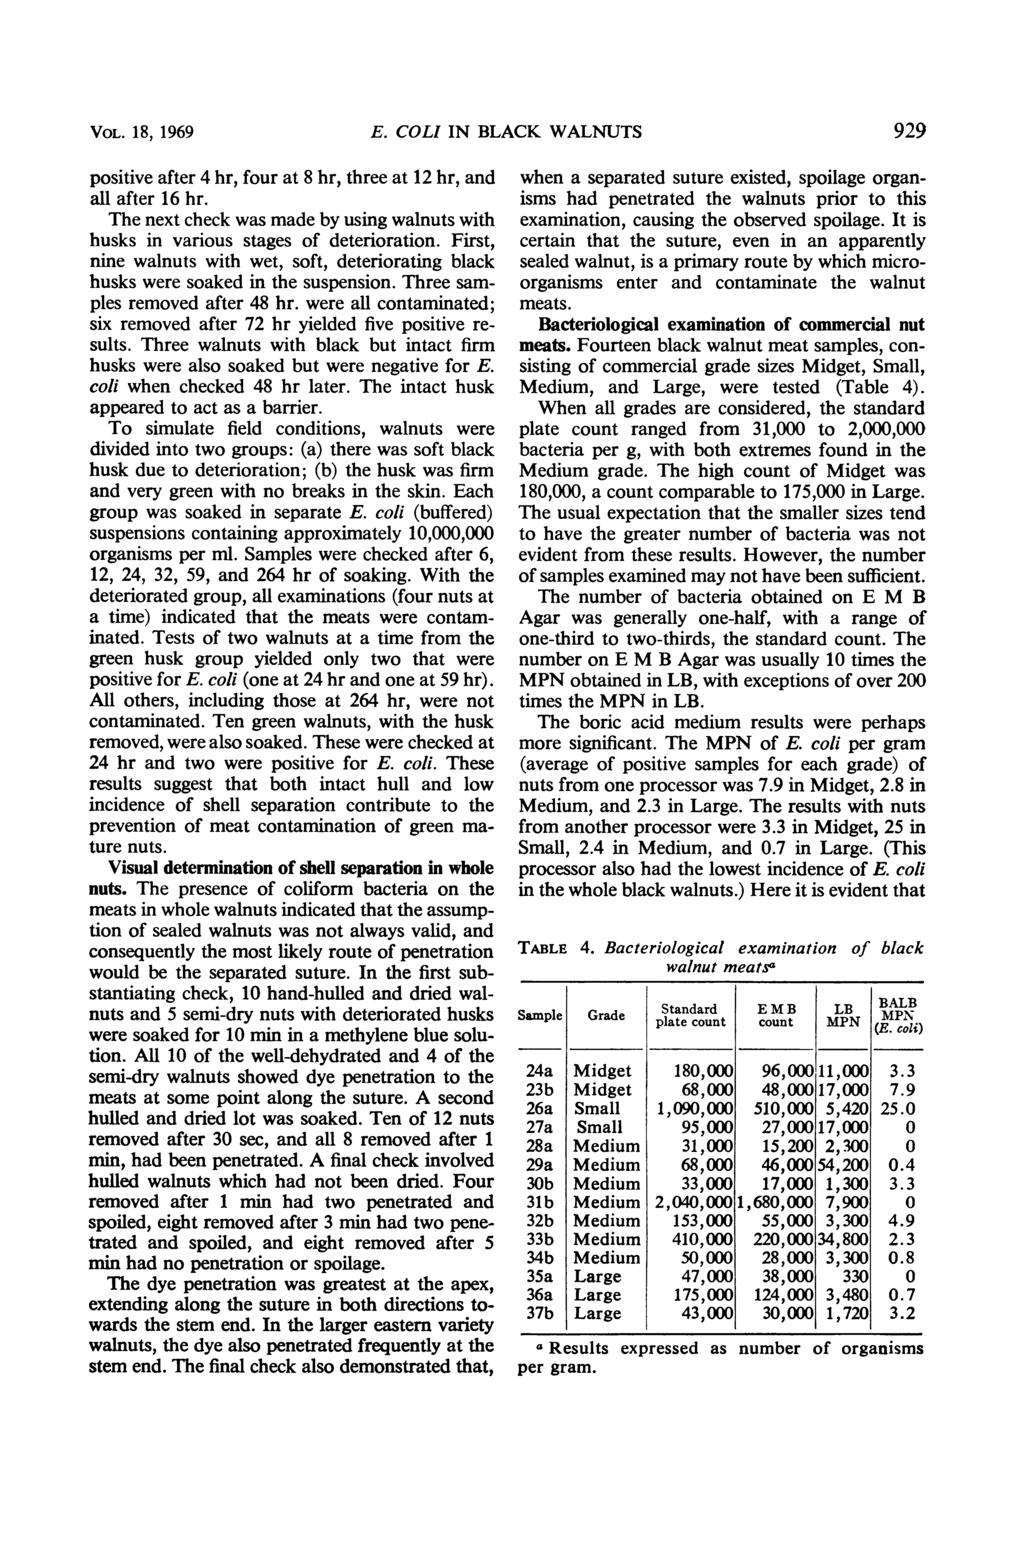 VOL. 18, 1969 E. COLI IN BLACK WALNUTS 929 positive after 4 hr, four at 8 hr, three at 12 hr, and all after 16 hr.